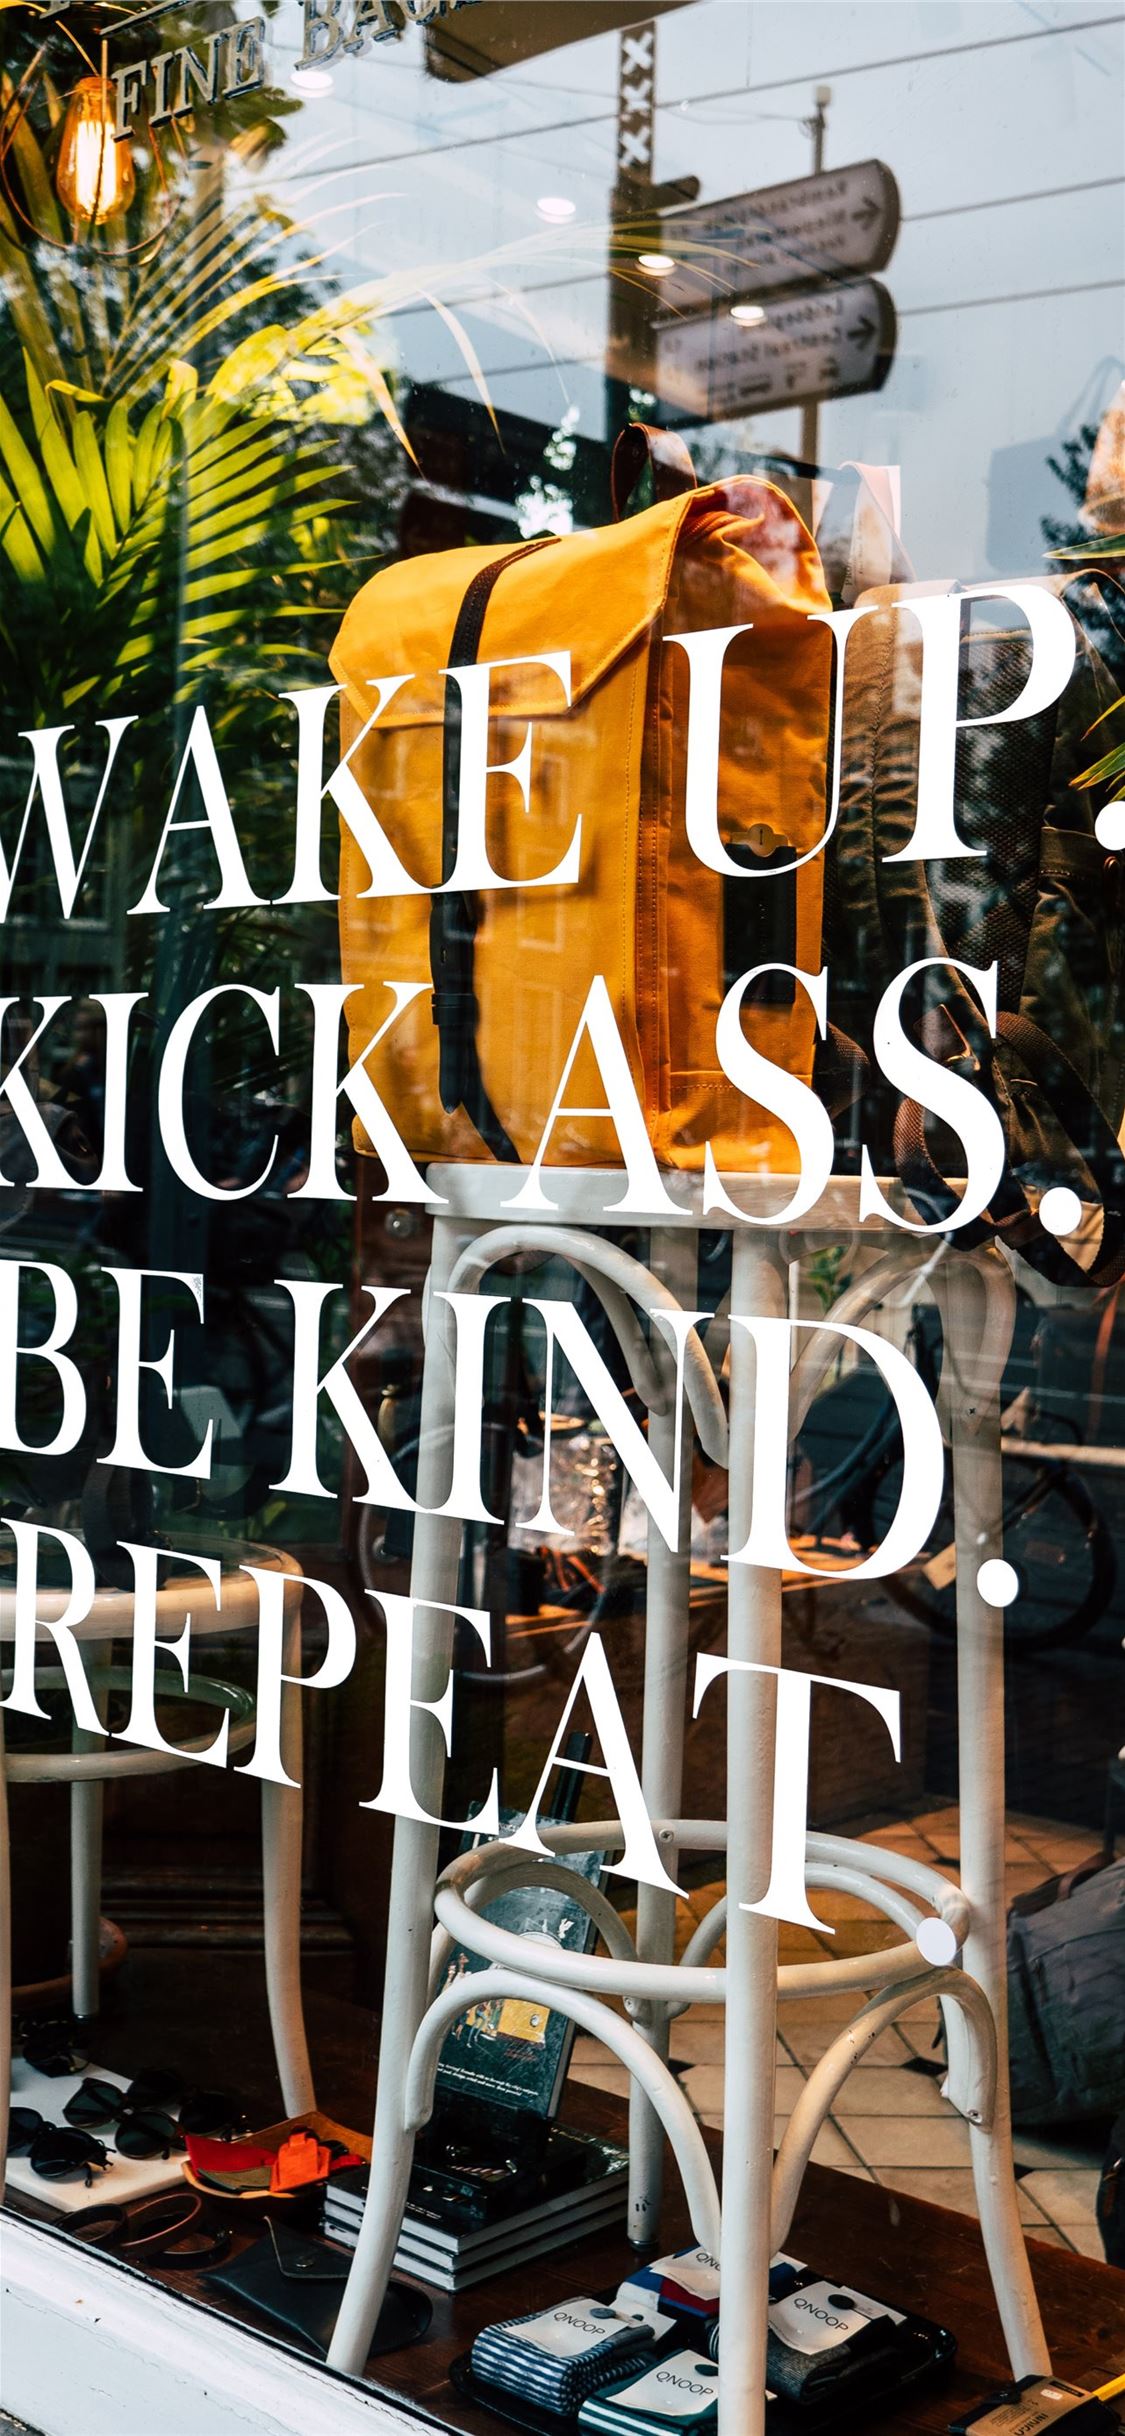 wake up kick ass be kind repeat printed glass wall iPhone X wallpaper 